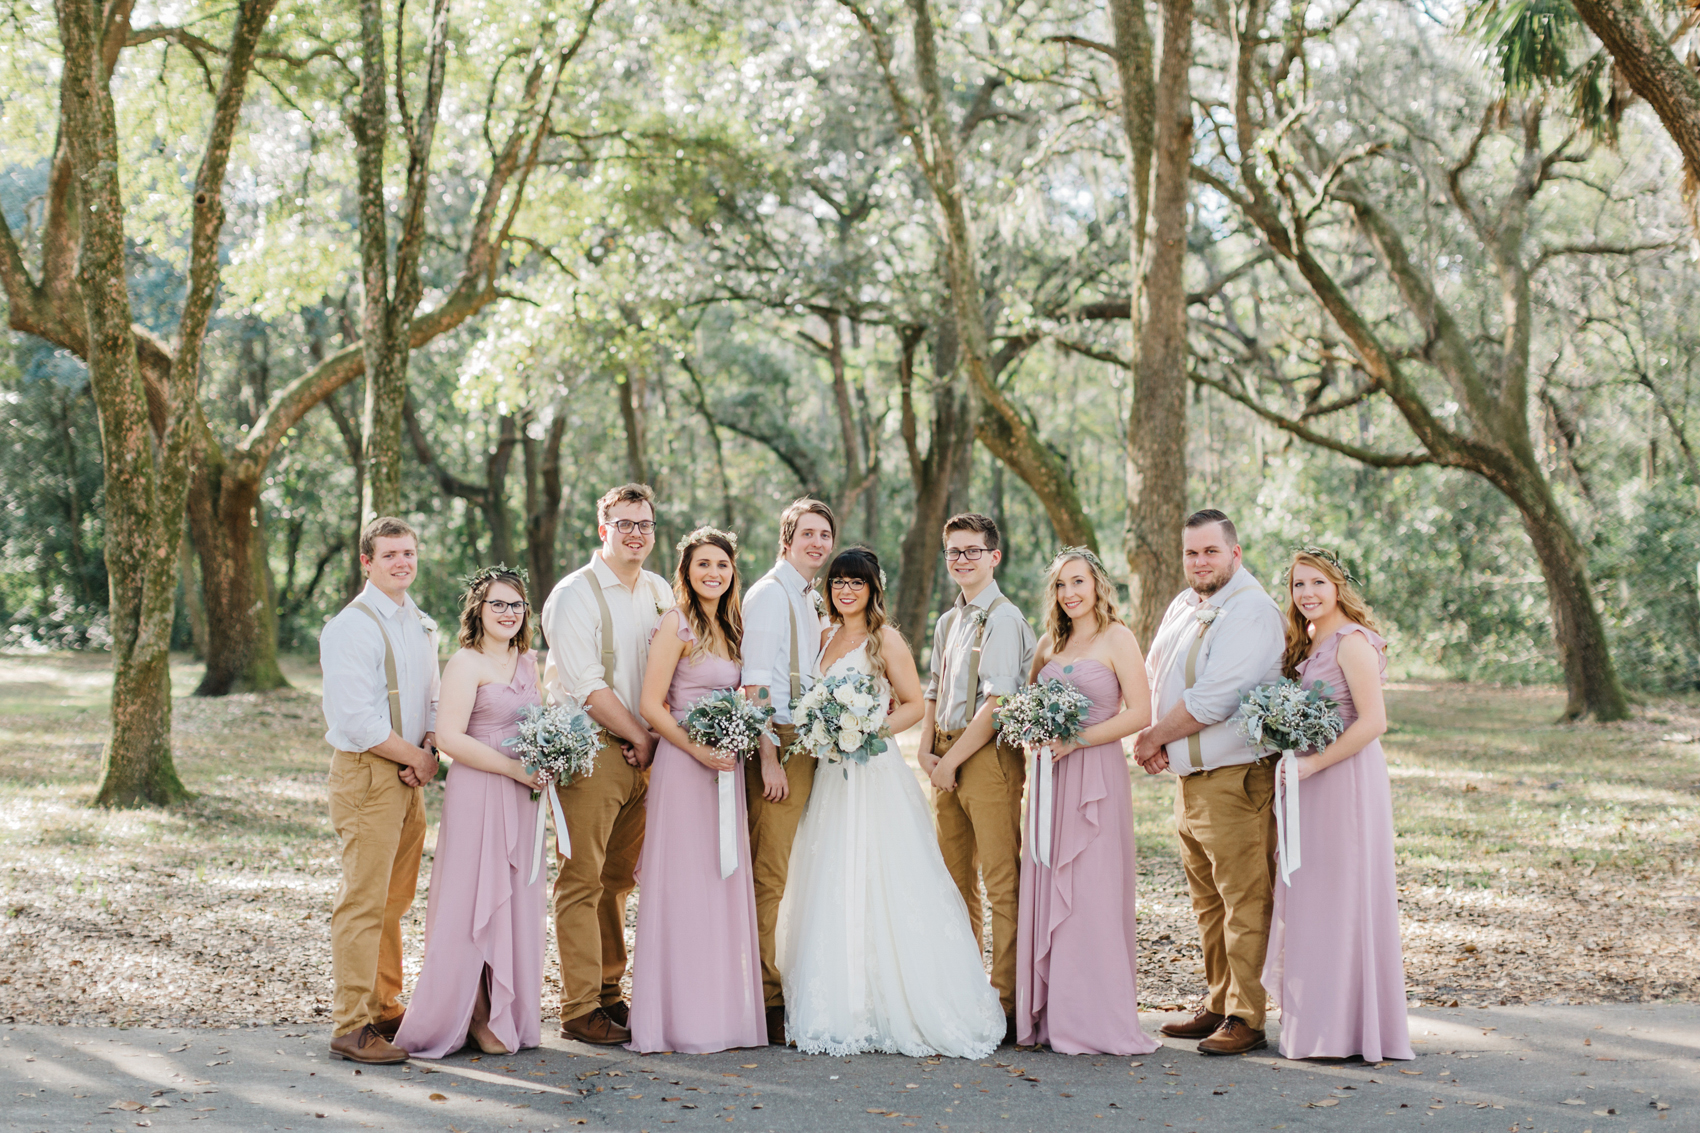 bridesmaids wearing dusty rose gowns and groomsmen wearing khaki pants with suspenders and bowties